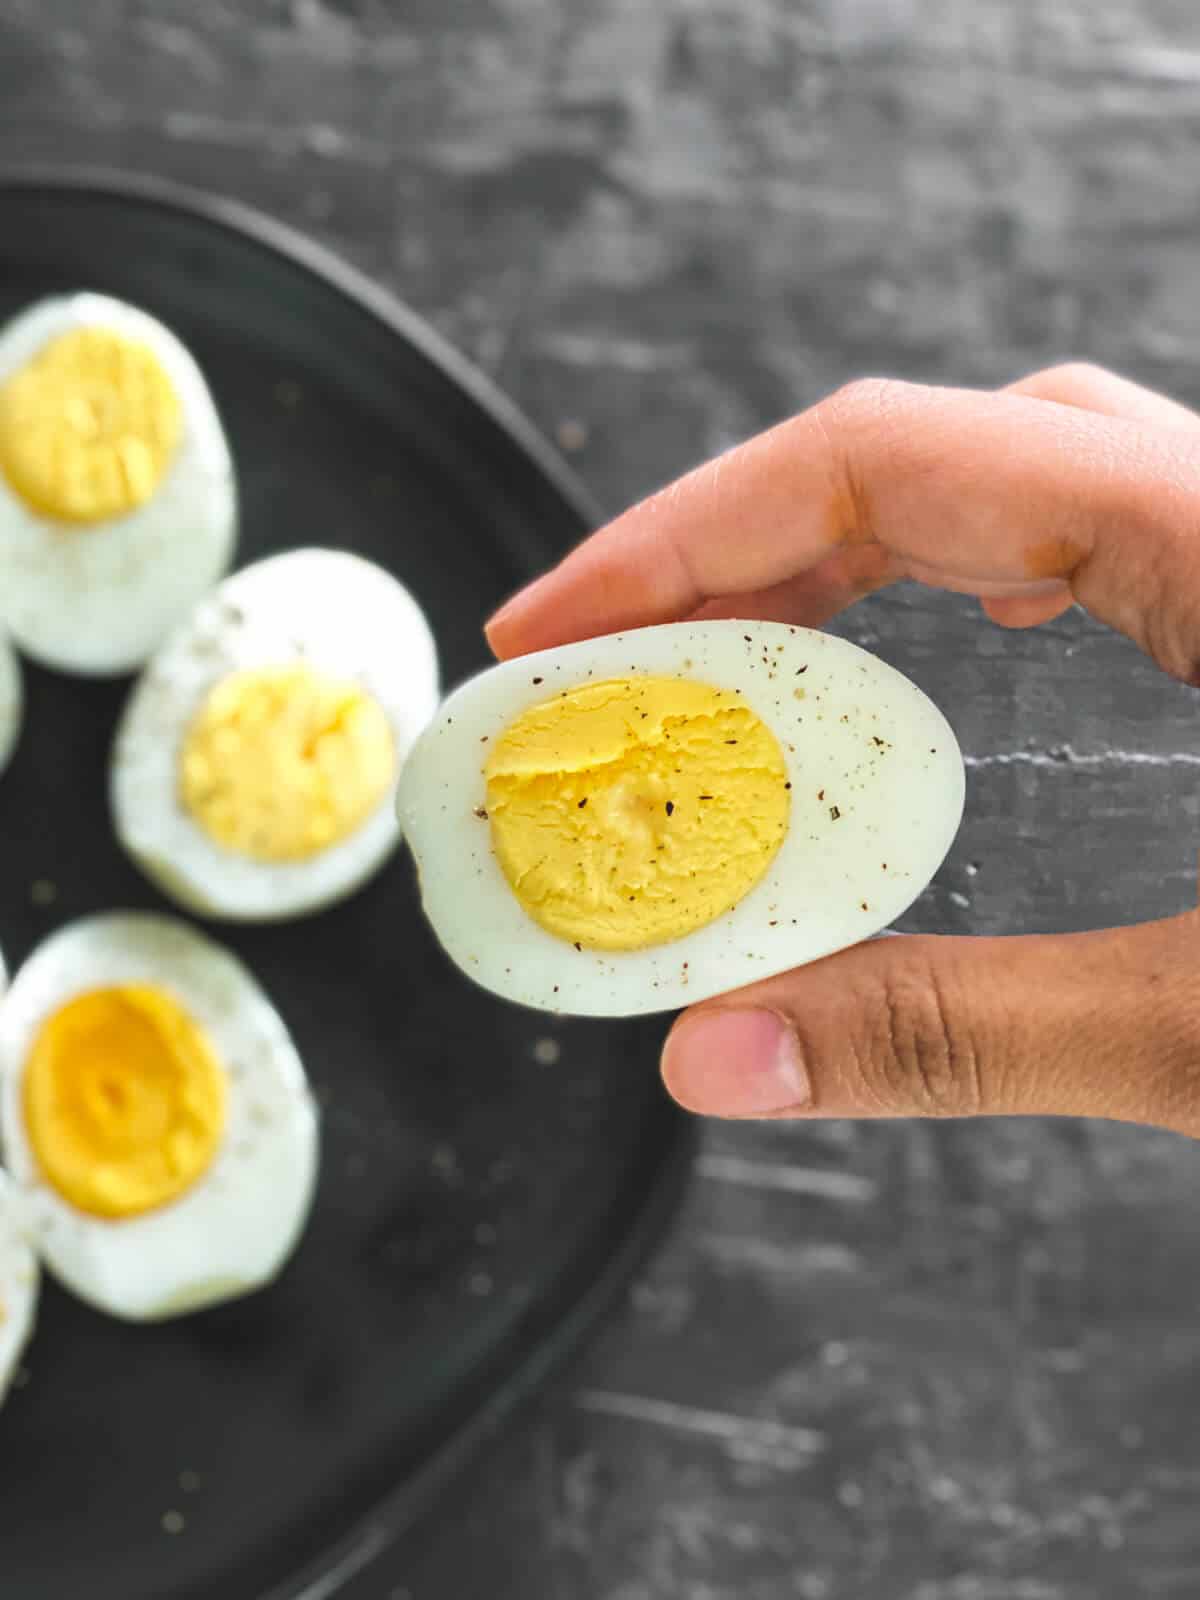 A hand holding a hard-boiled egg from the air fryer over a plate with other air fryer hard boiled eggs